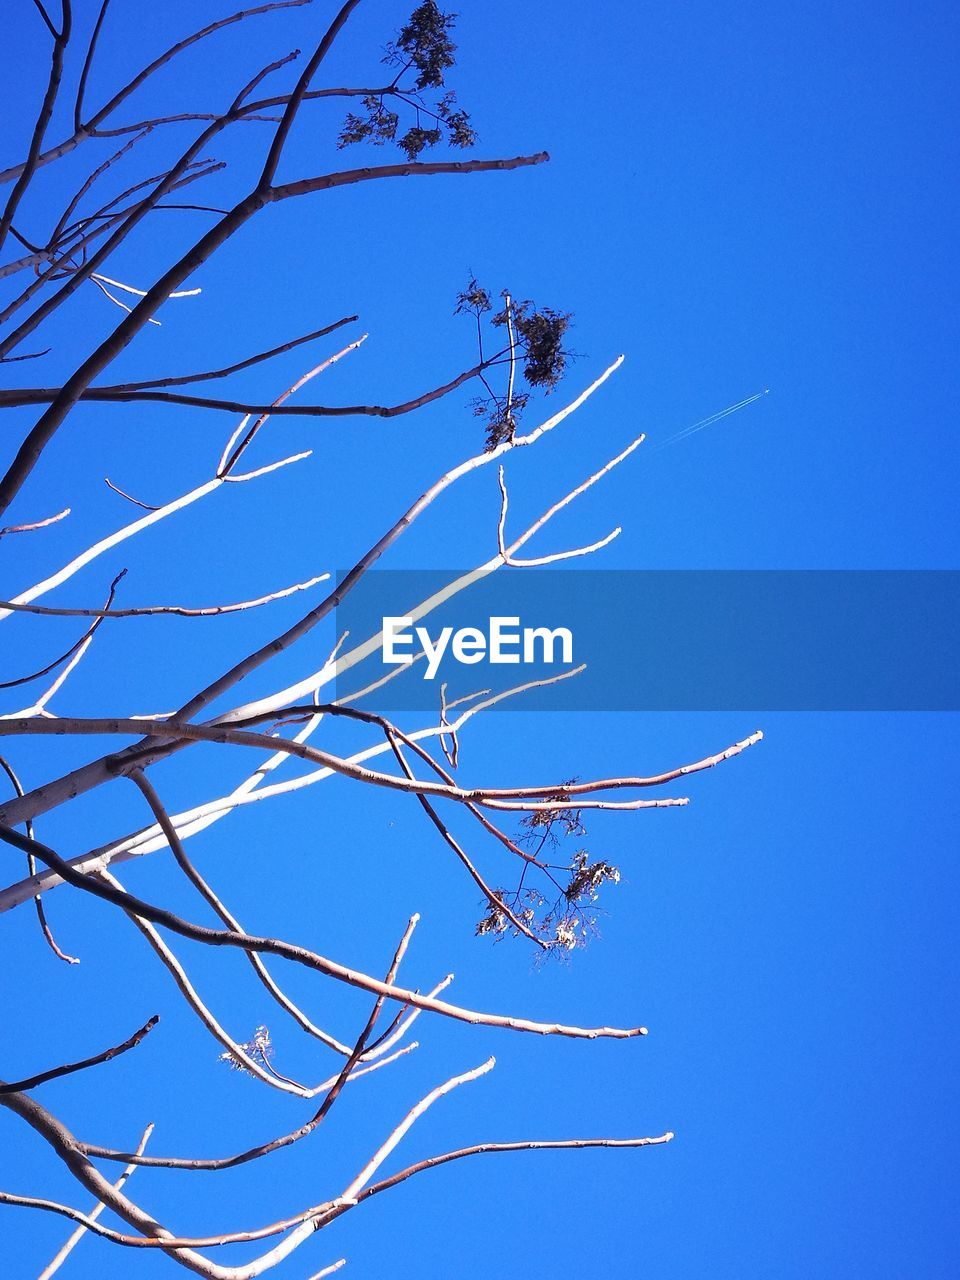 LOW ANGLE VIEW OF TREE BRANCHES AGAINST BLUE SKY